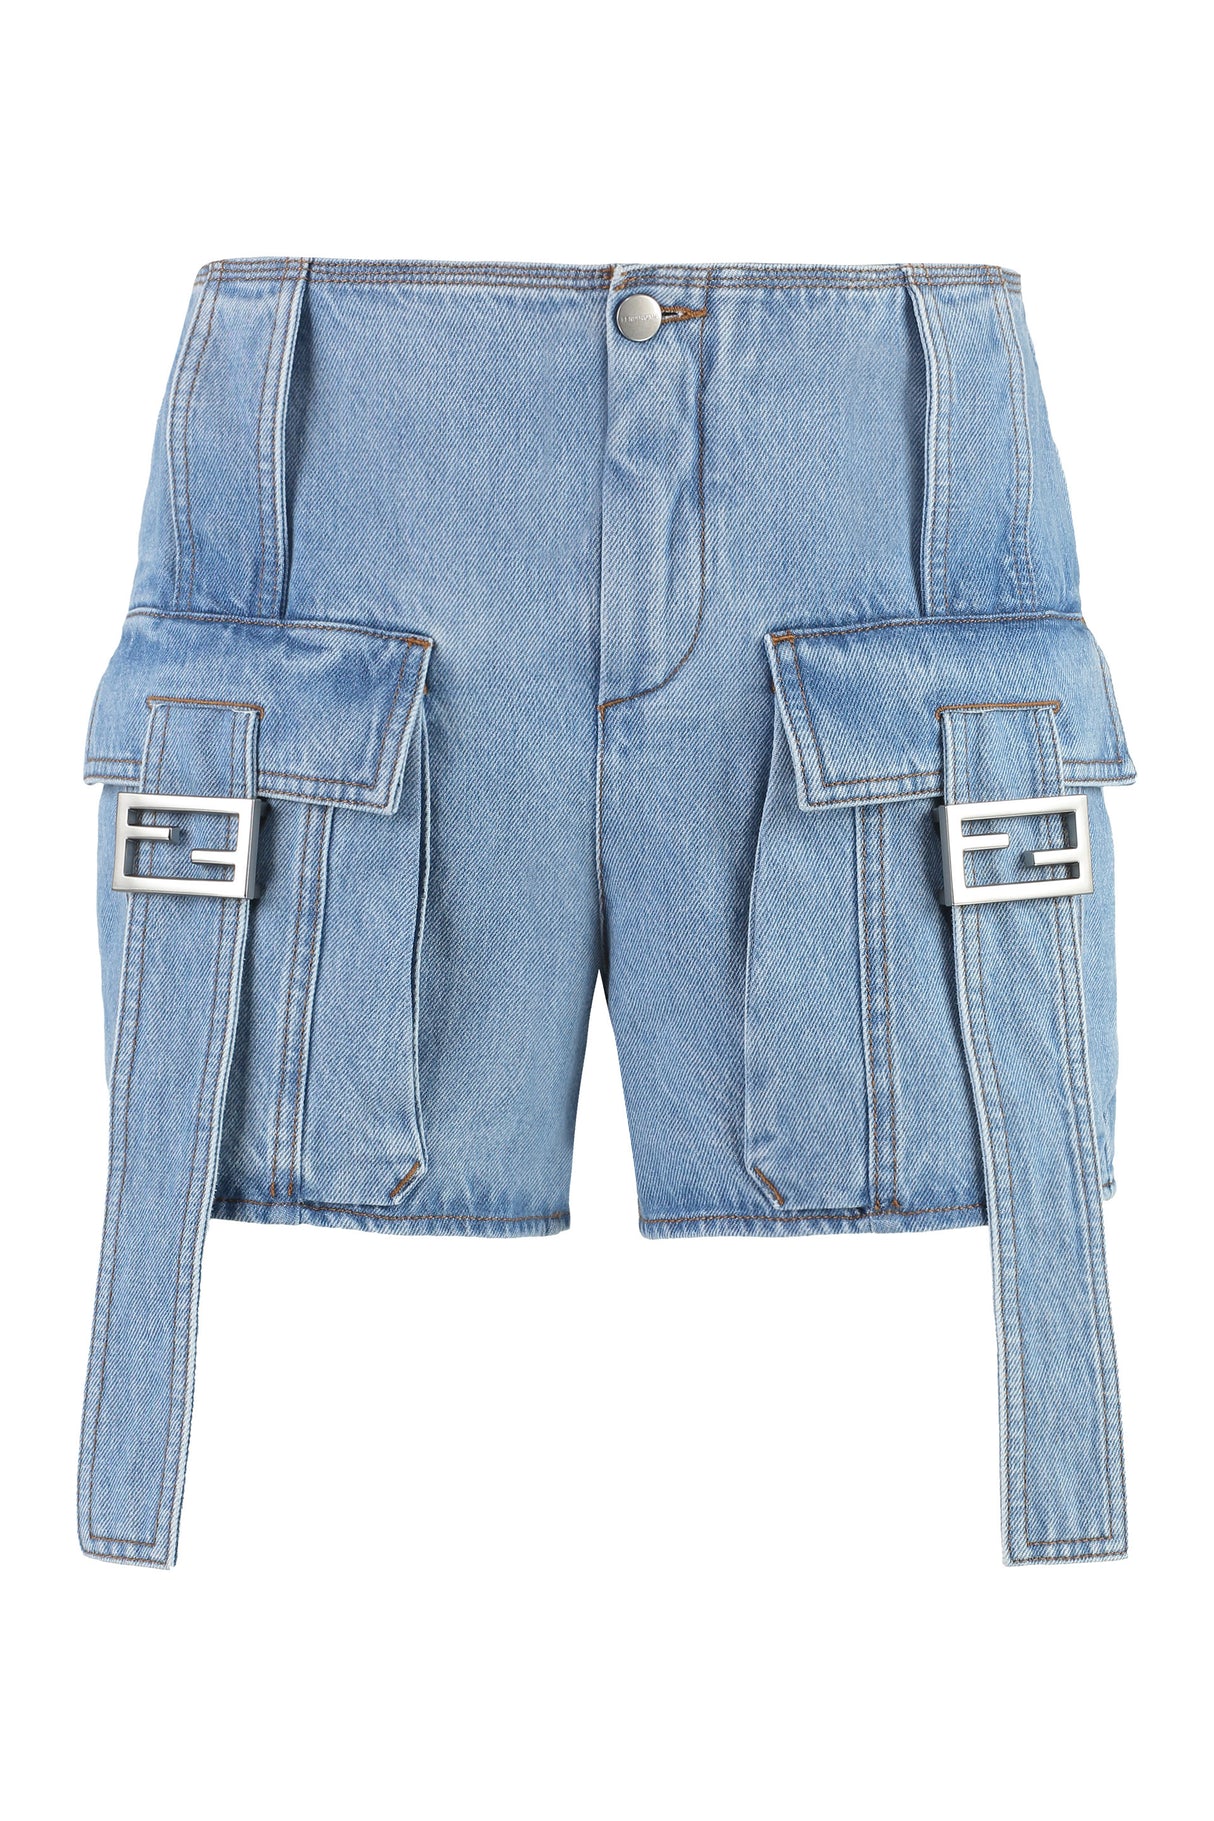 Blue Denim Shorts for Women - SS23 Collection by FENDI